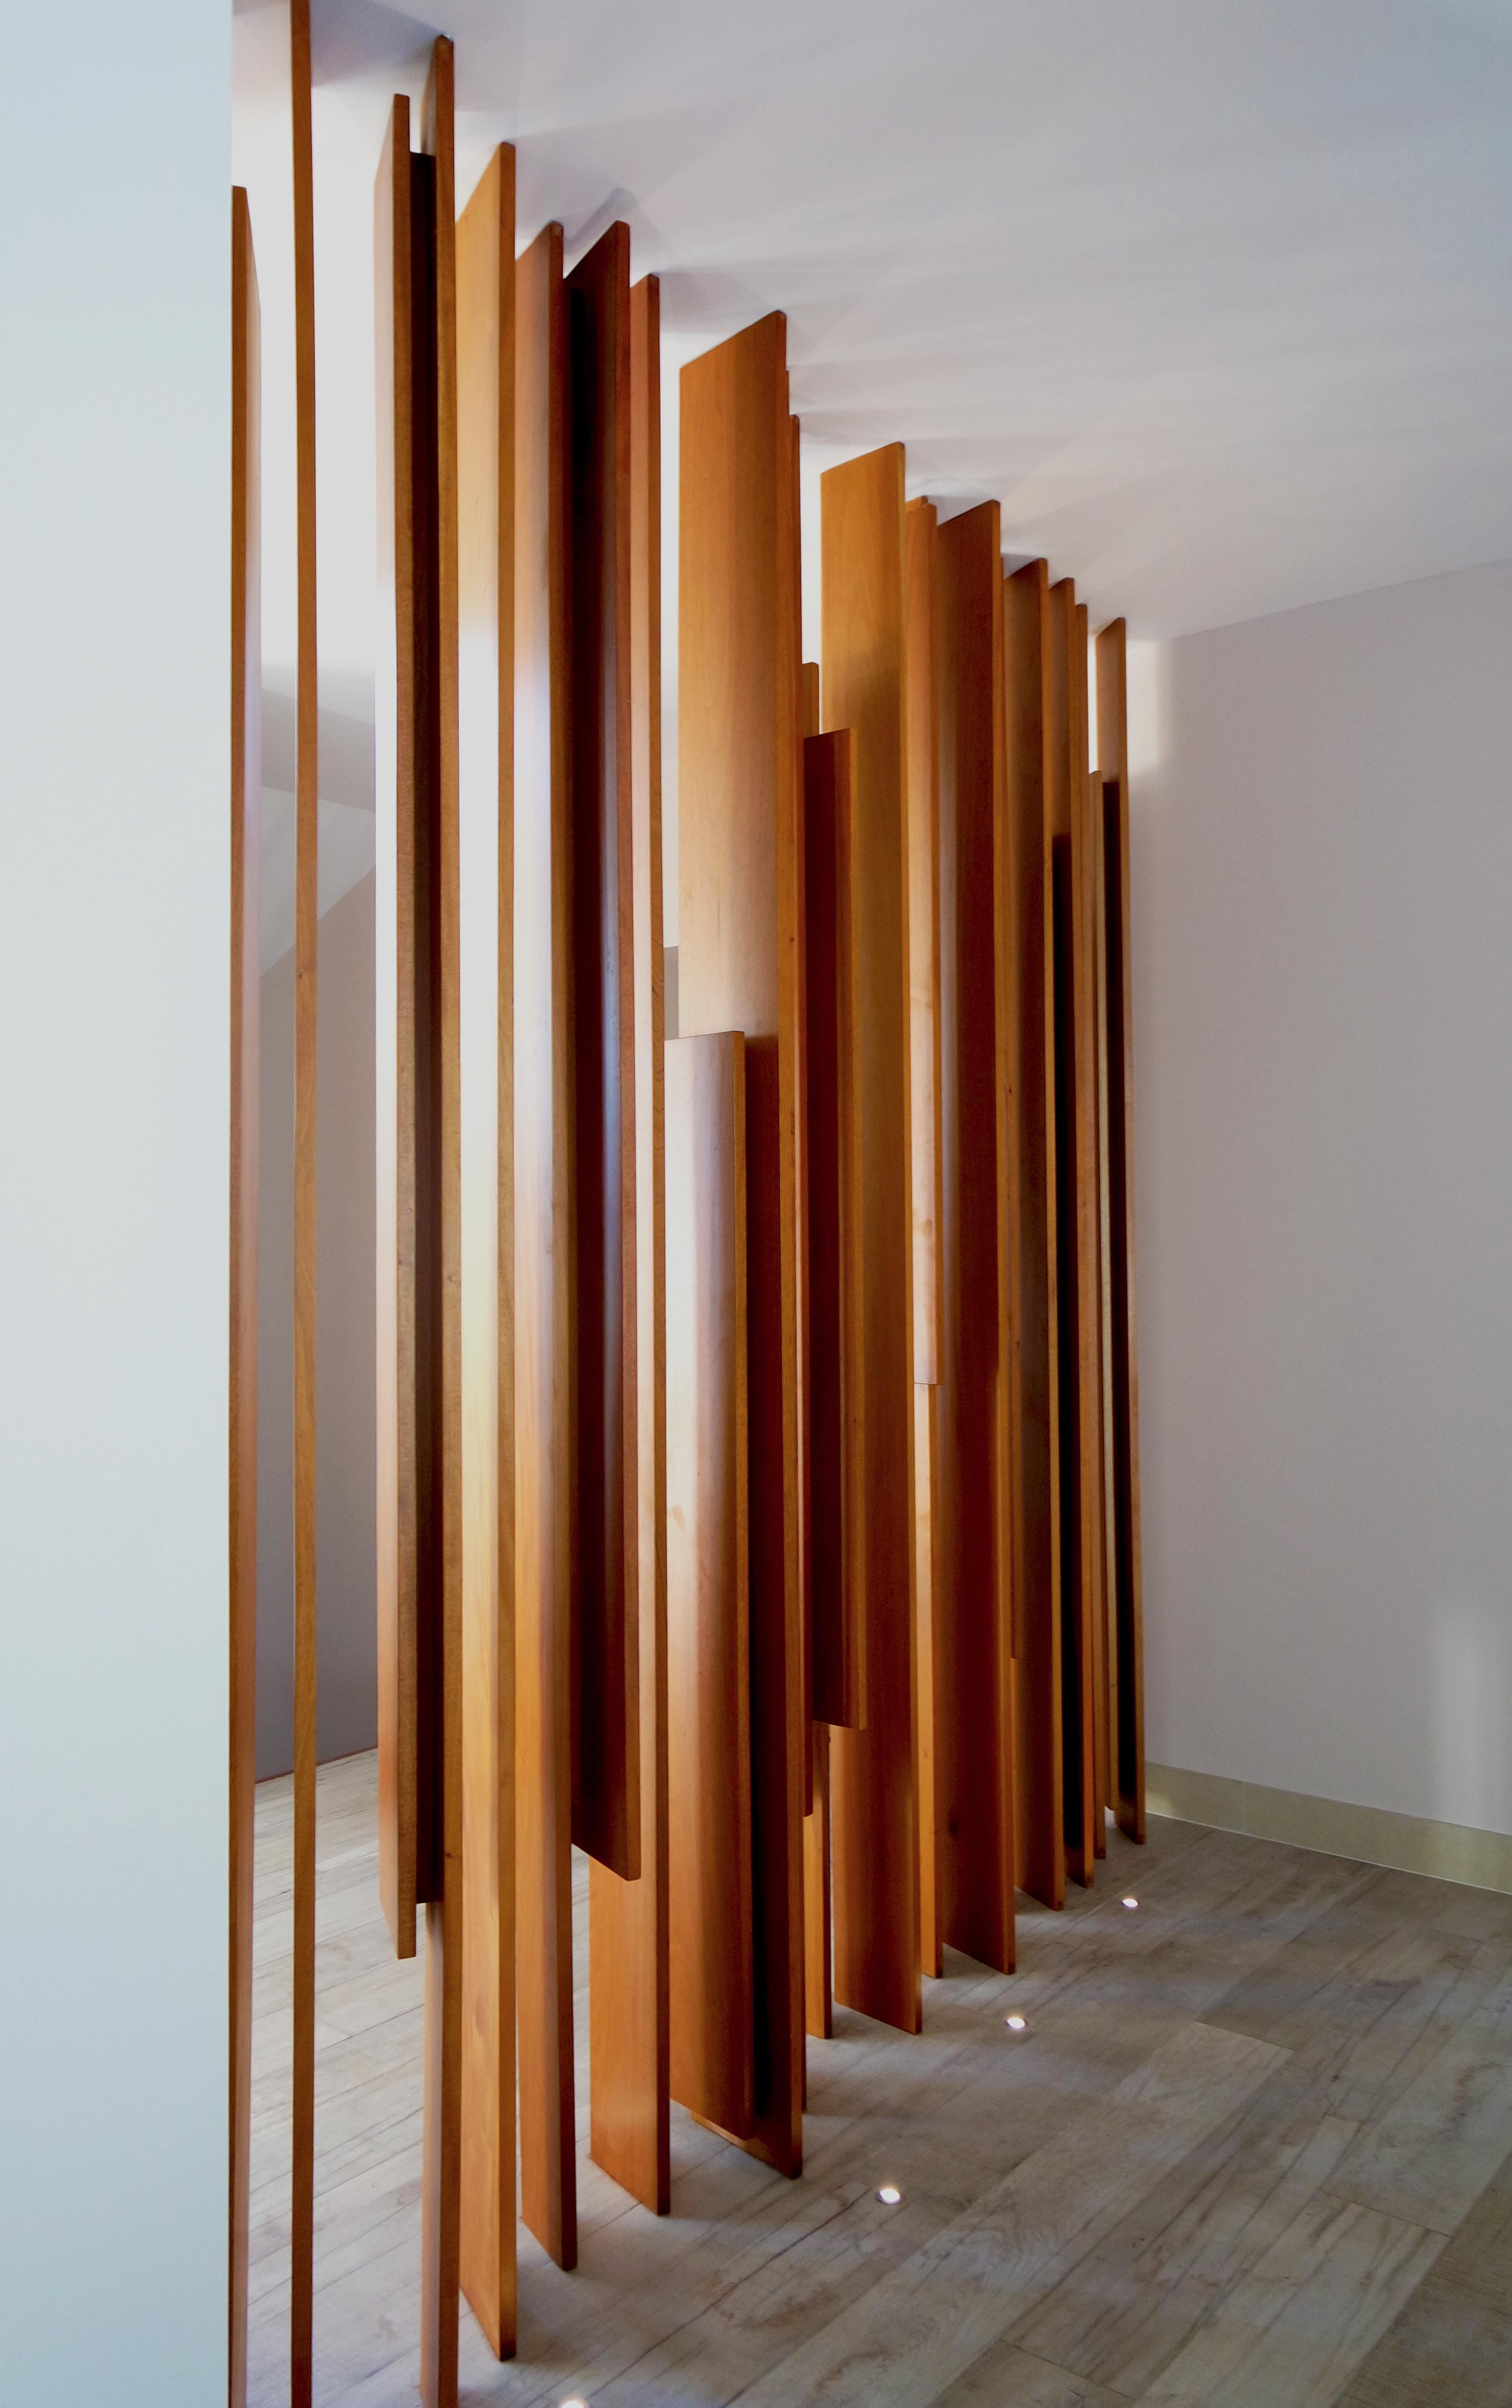 Modern wood sculpture wall screen by Pierre Sarkis from Celine collection. Inspired in the rhythm of ocean waves, beauty of fluid movement and feminine cadenza by basic elements and fine selected woods. Artistic wooden screen, a great option for